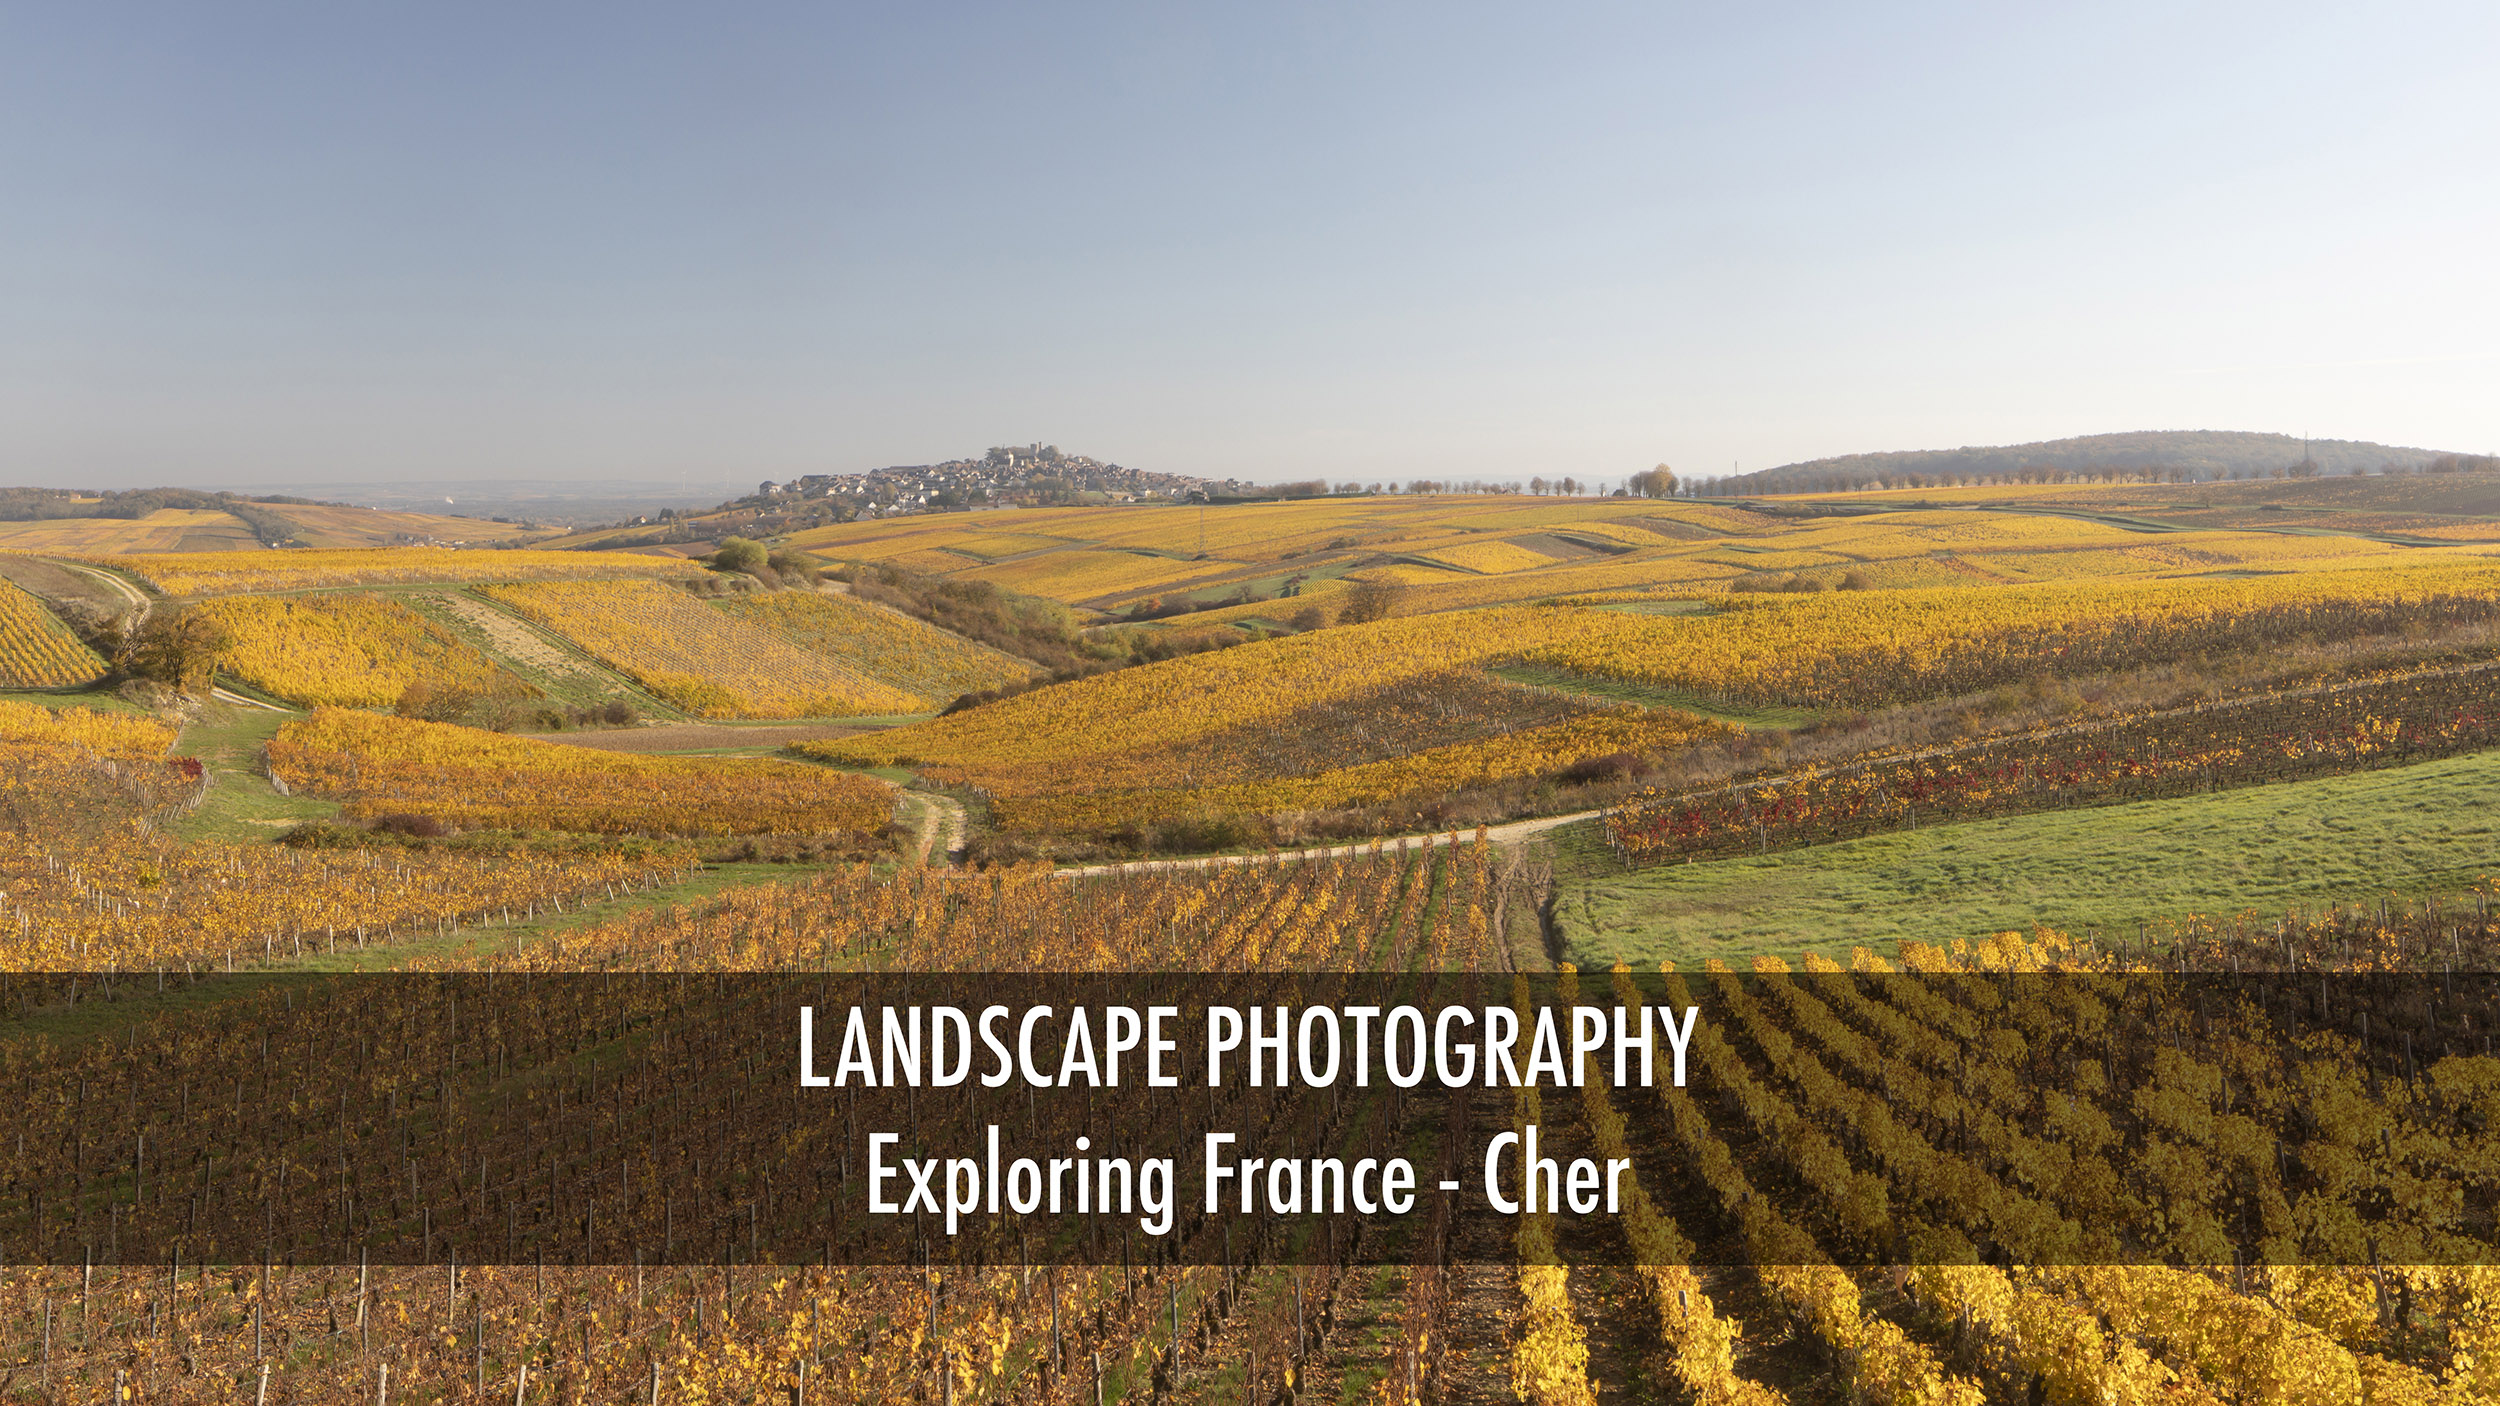 Exploring France in the department of Cher. Landscape photography.